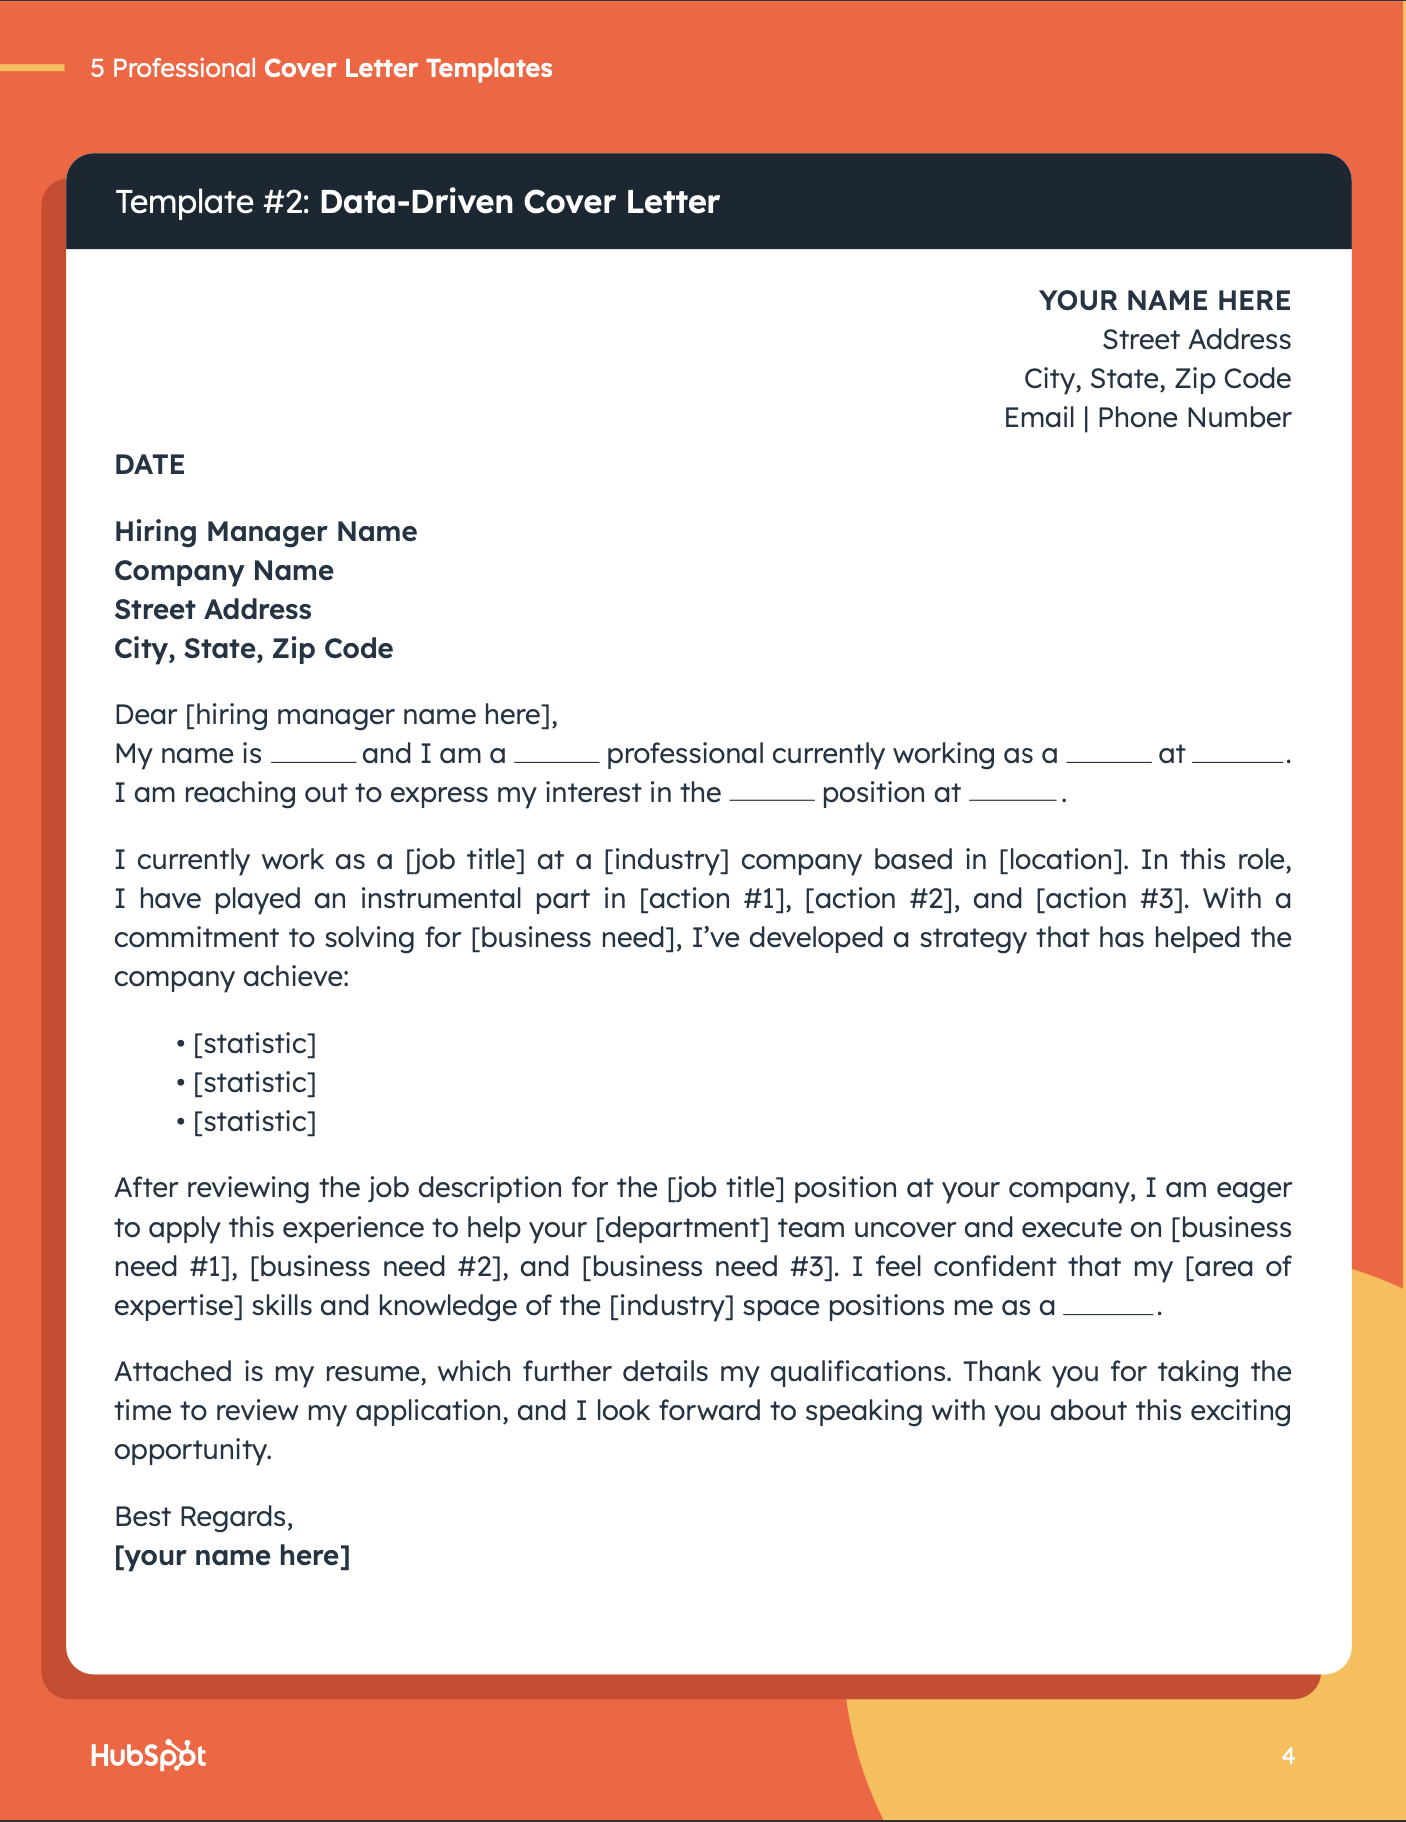 Cover Letter Templates - 2